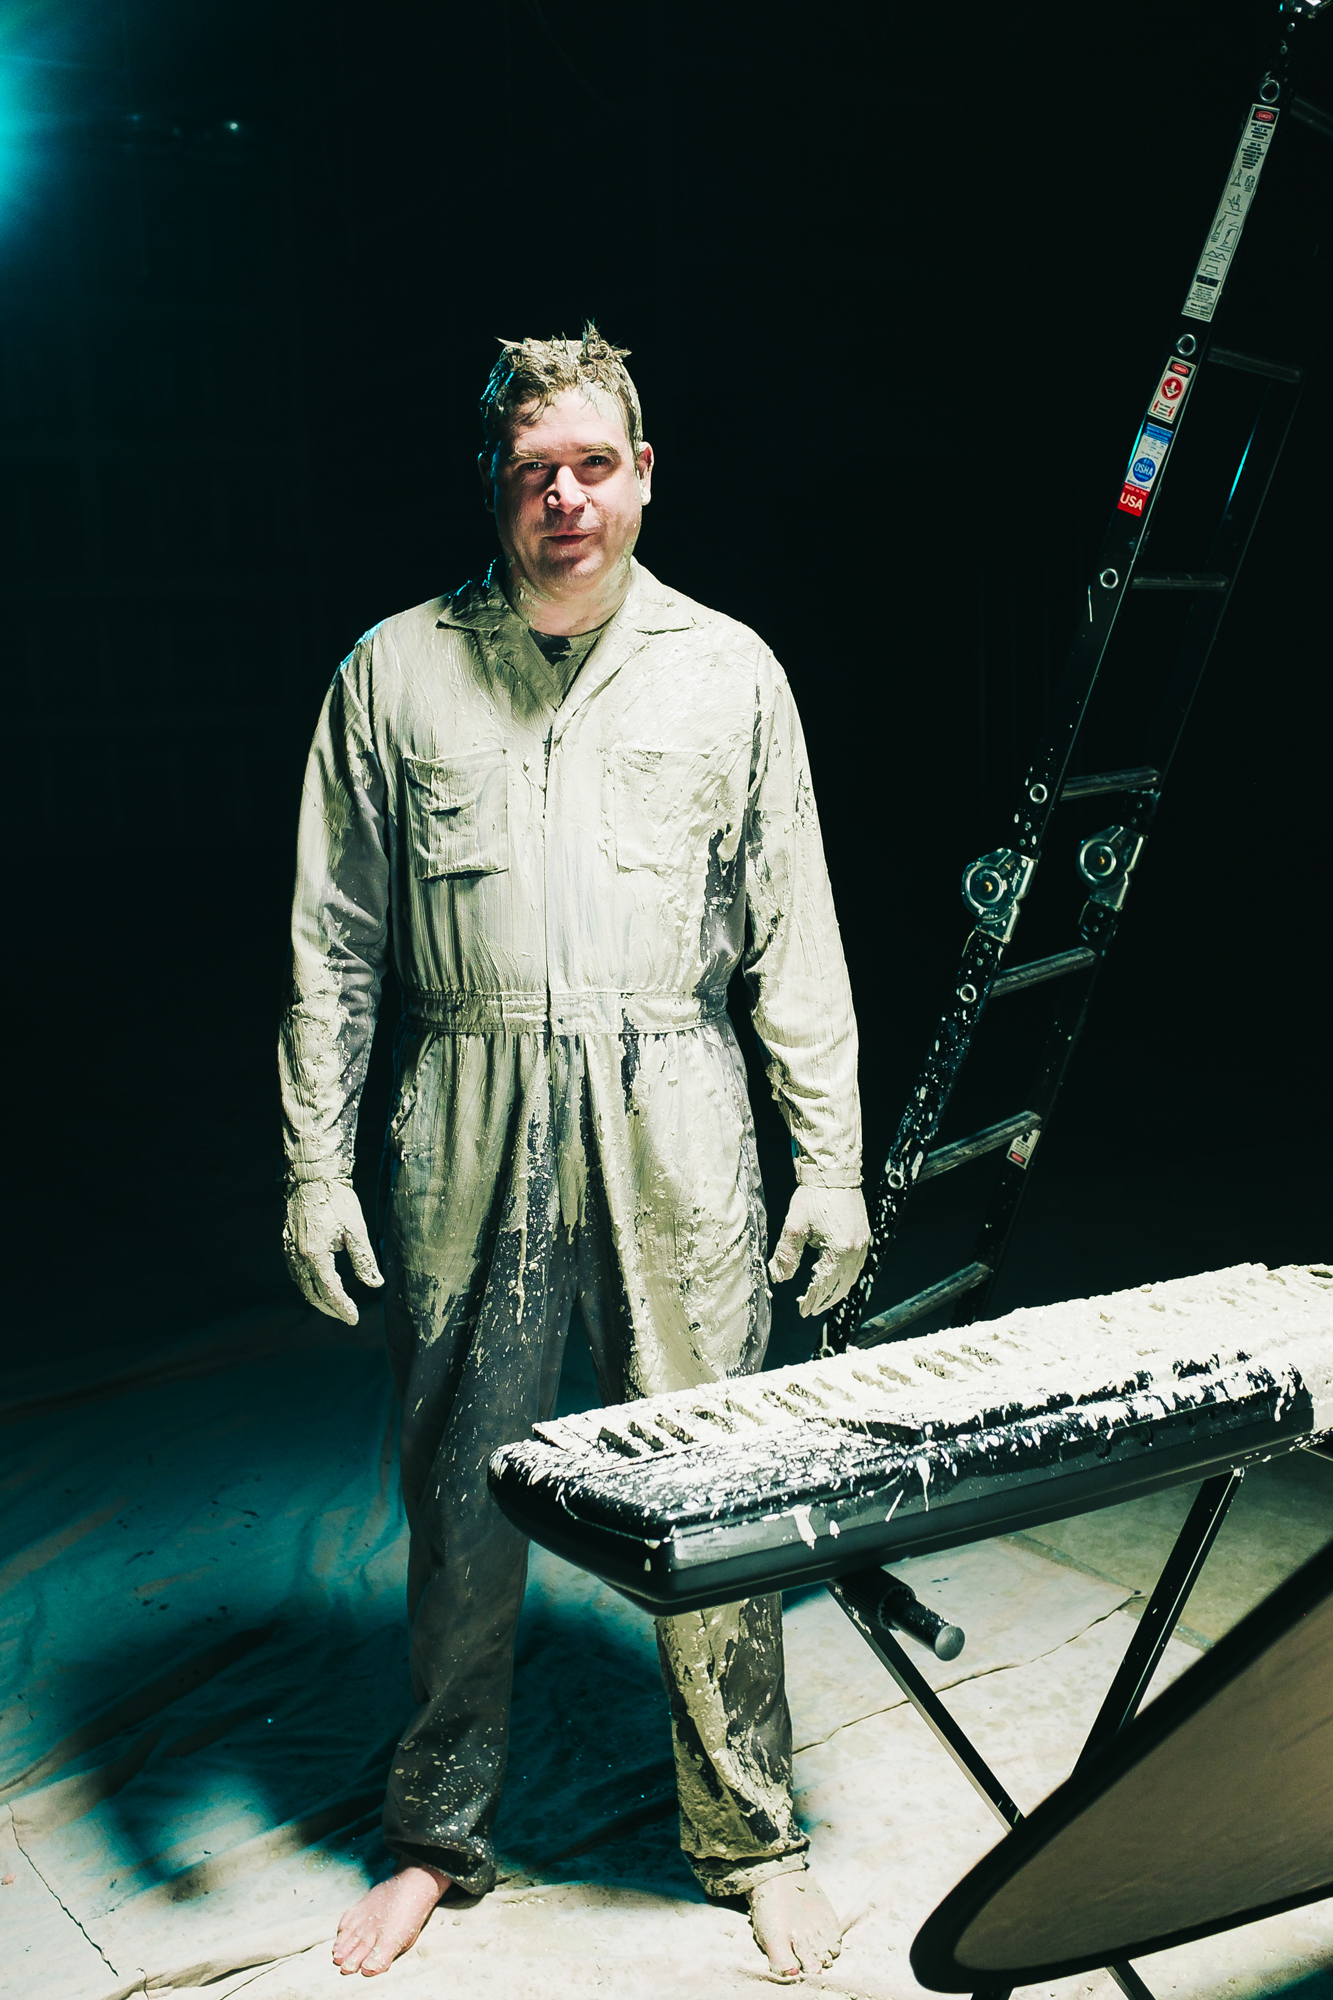 Man covered in mud dressed in overalls next to a keyboard and ladder.